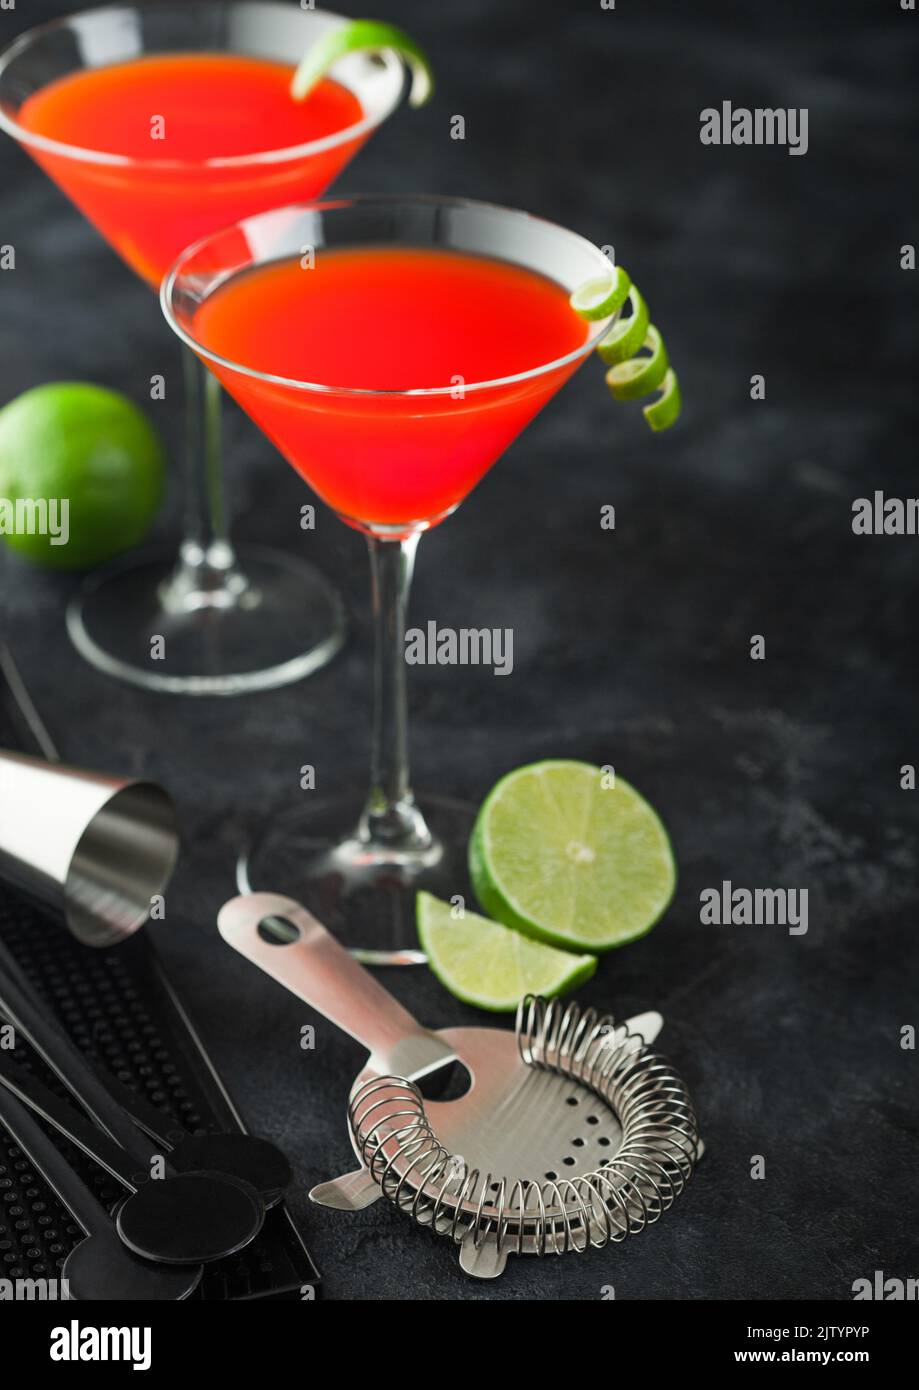 Cosmopolitan cocktail in classic crystal glasses with lime peel and fresh limes with strainer on black table background. Top view Stock Photo